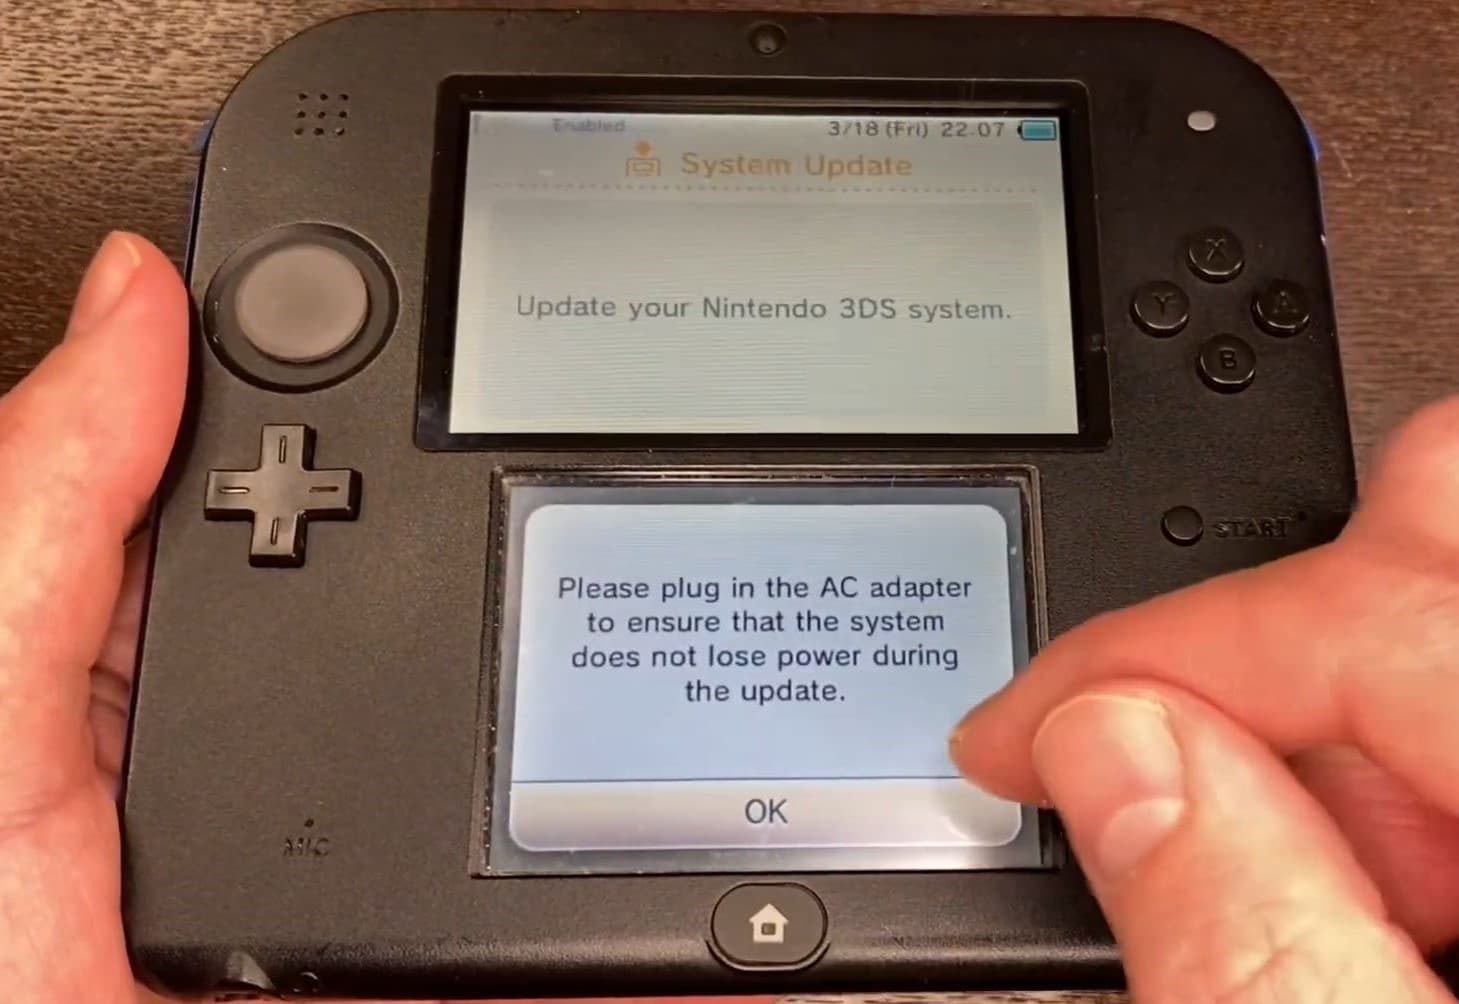 3ds connect the ac adapter prompt